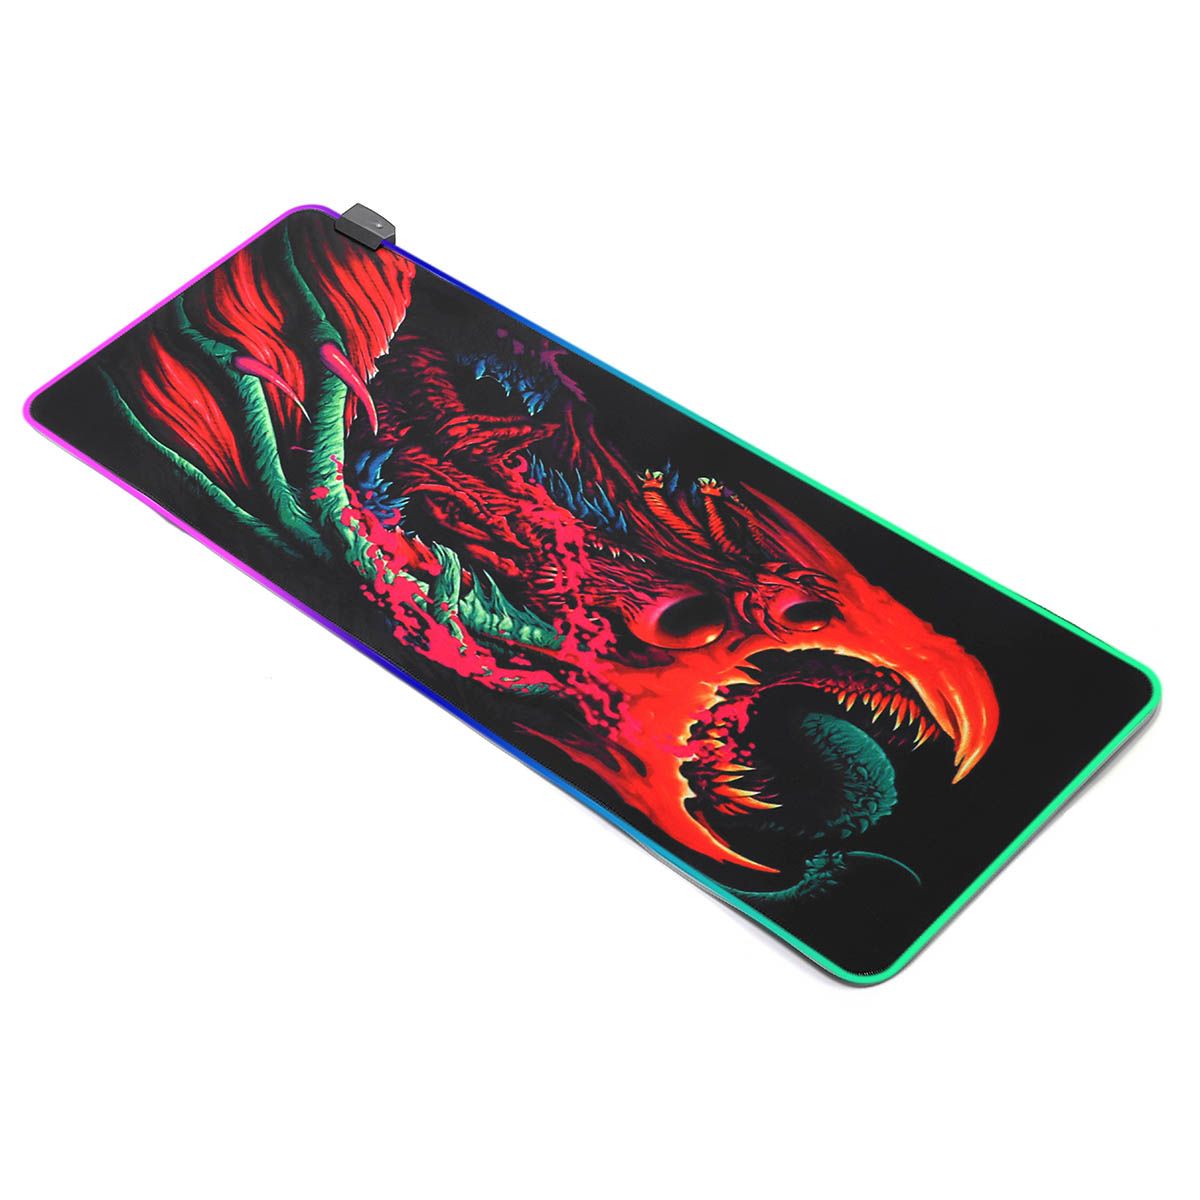 RGB-Mouse-Pad-Beast-Gaming-Keyboard-Pad-Non-slip-Rubber-Desktop-Table-Protective-Mat-for-Home-Office-1760612